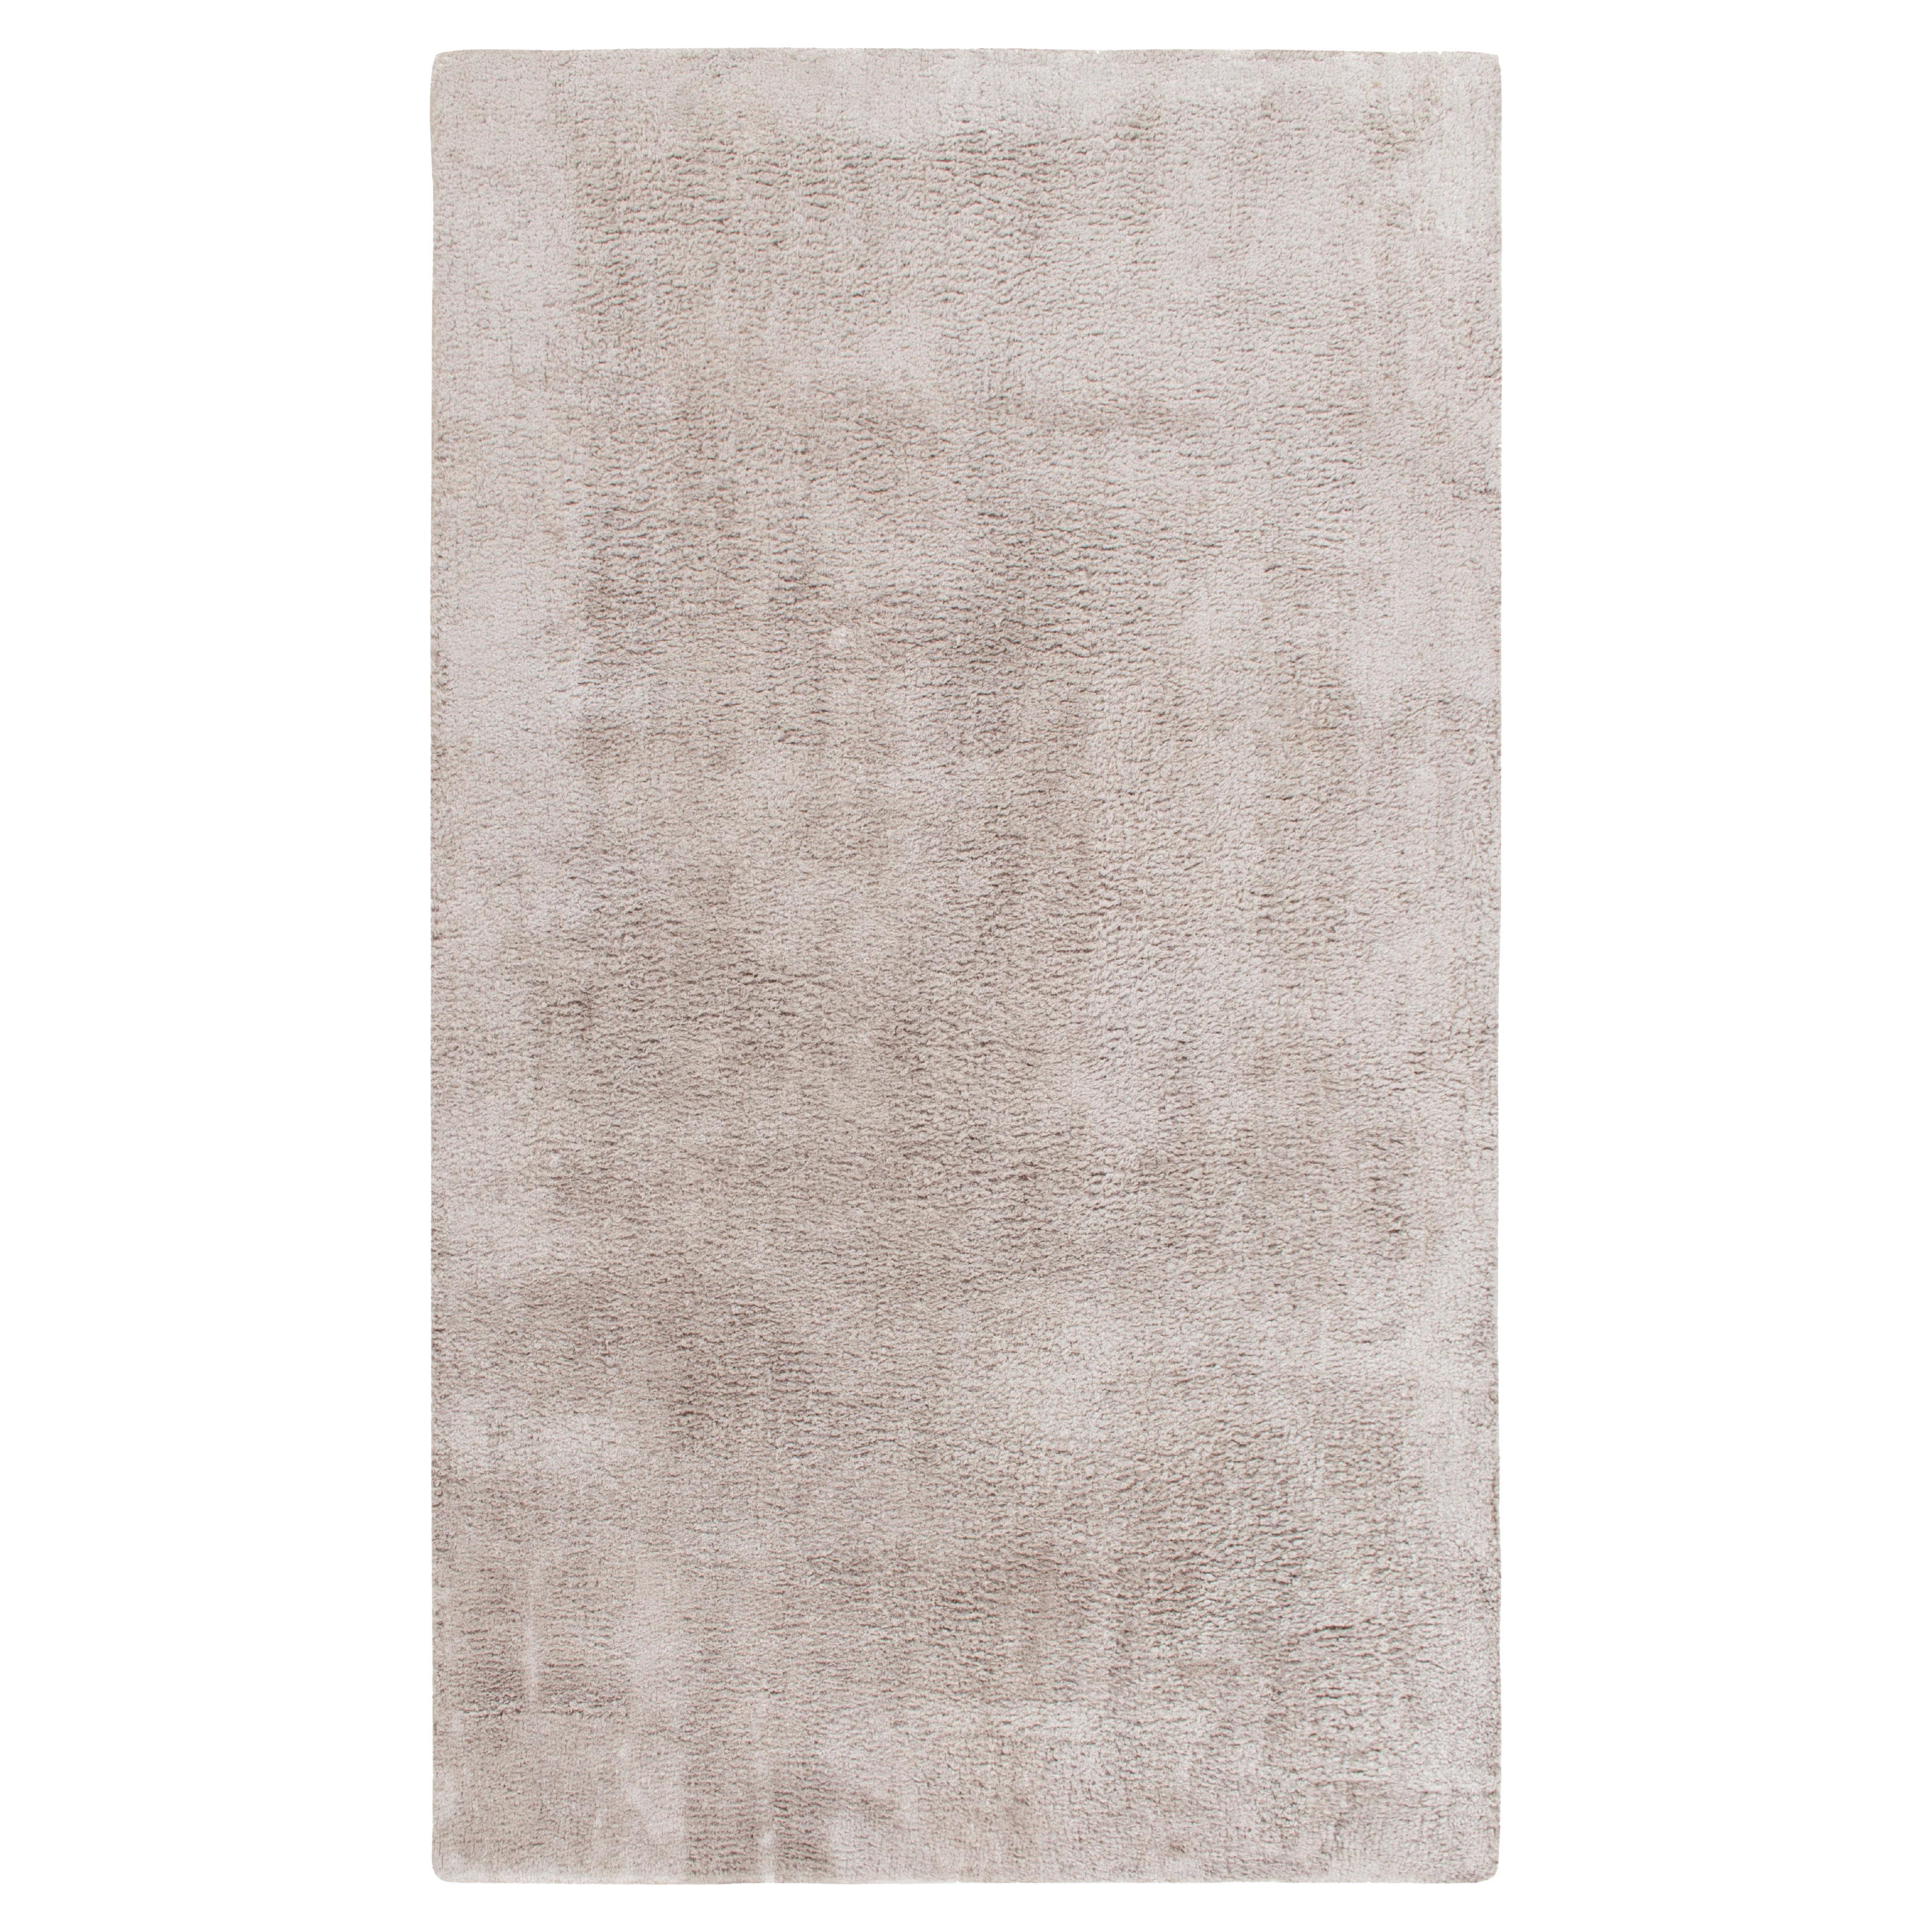 Rug & Kilim's Contemporary Solid Gray Rug in Shag Pile